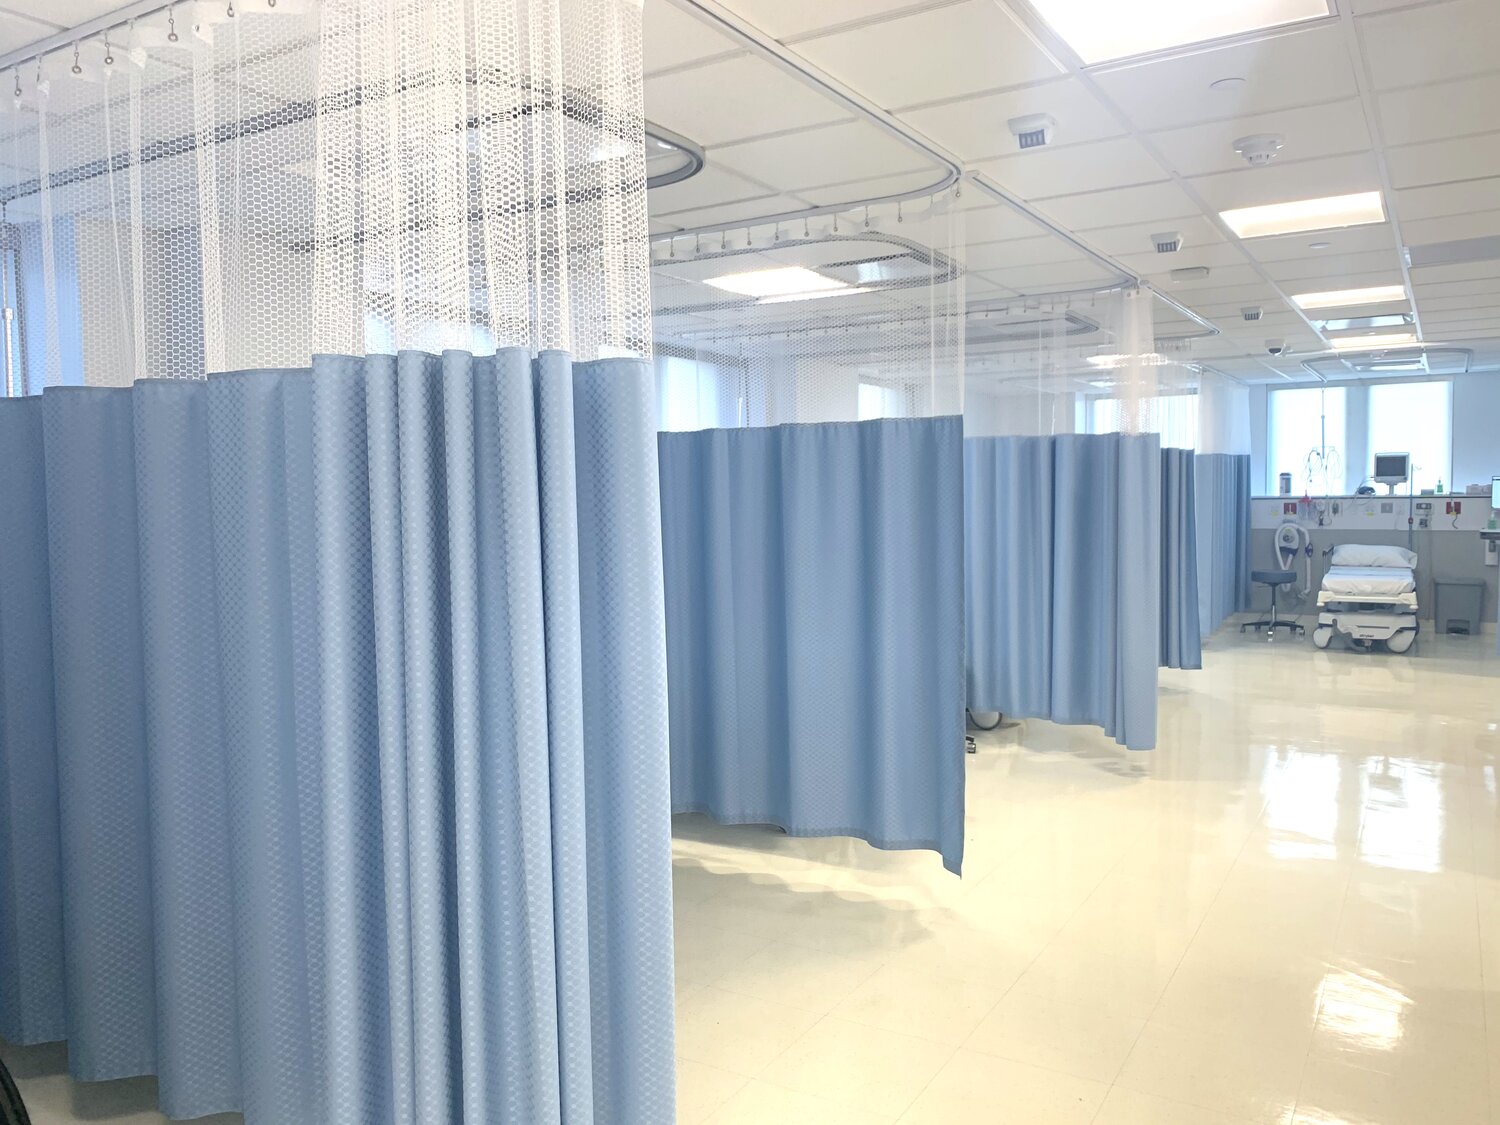 Hospital curtains are an essential part of the hospital experience. Find out how to choose the best curtains here.